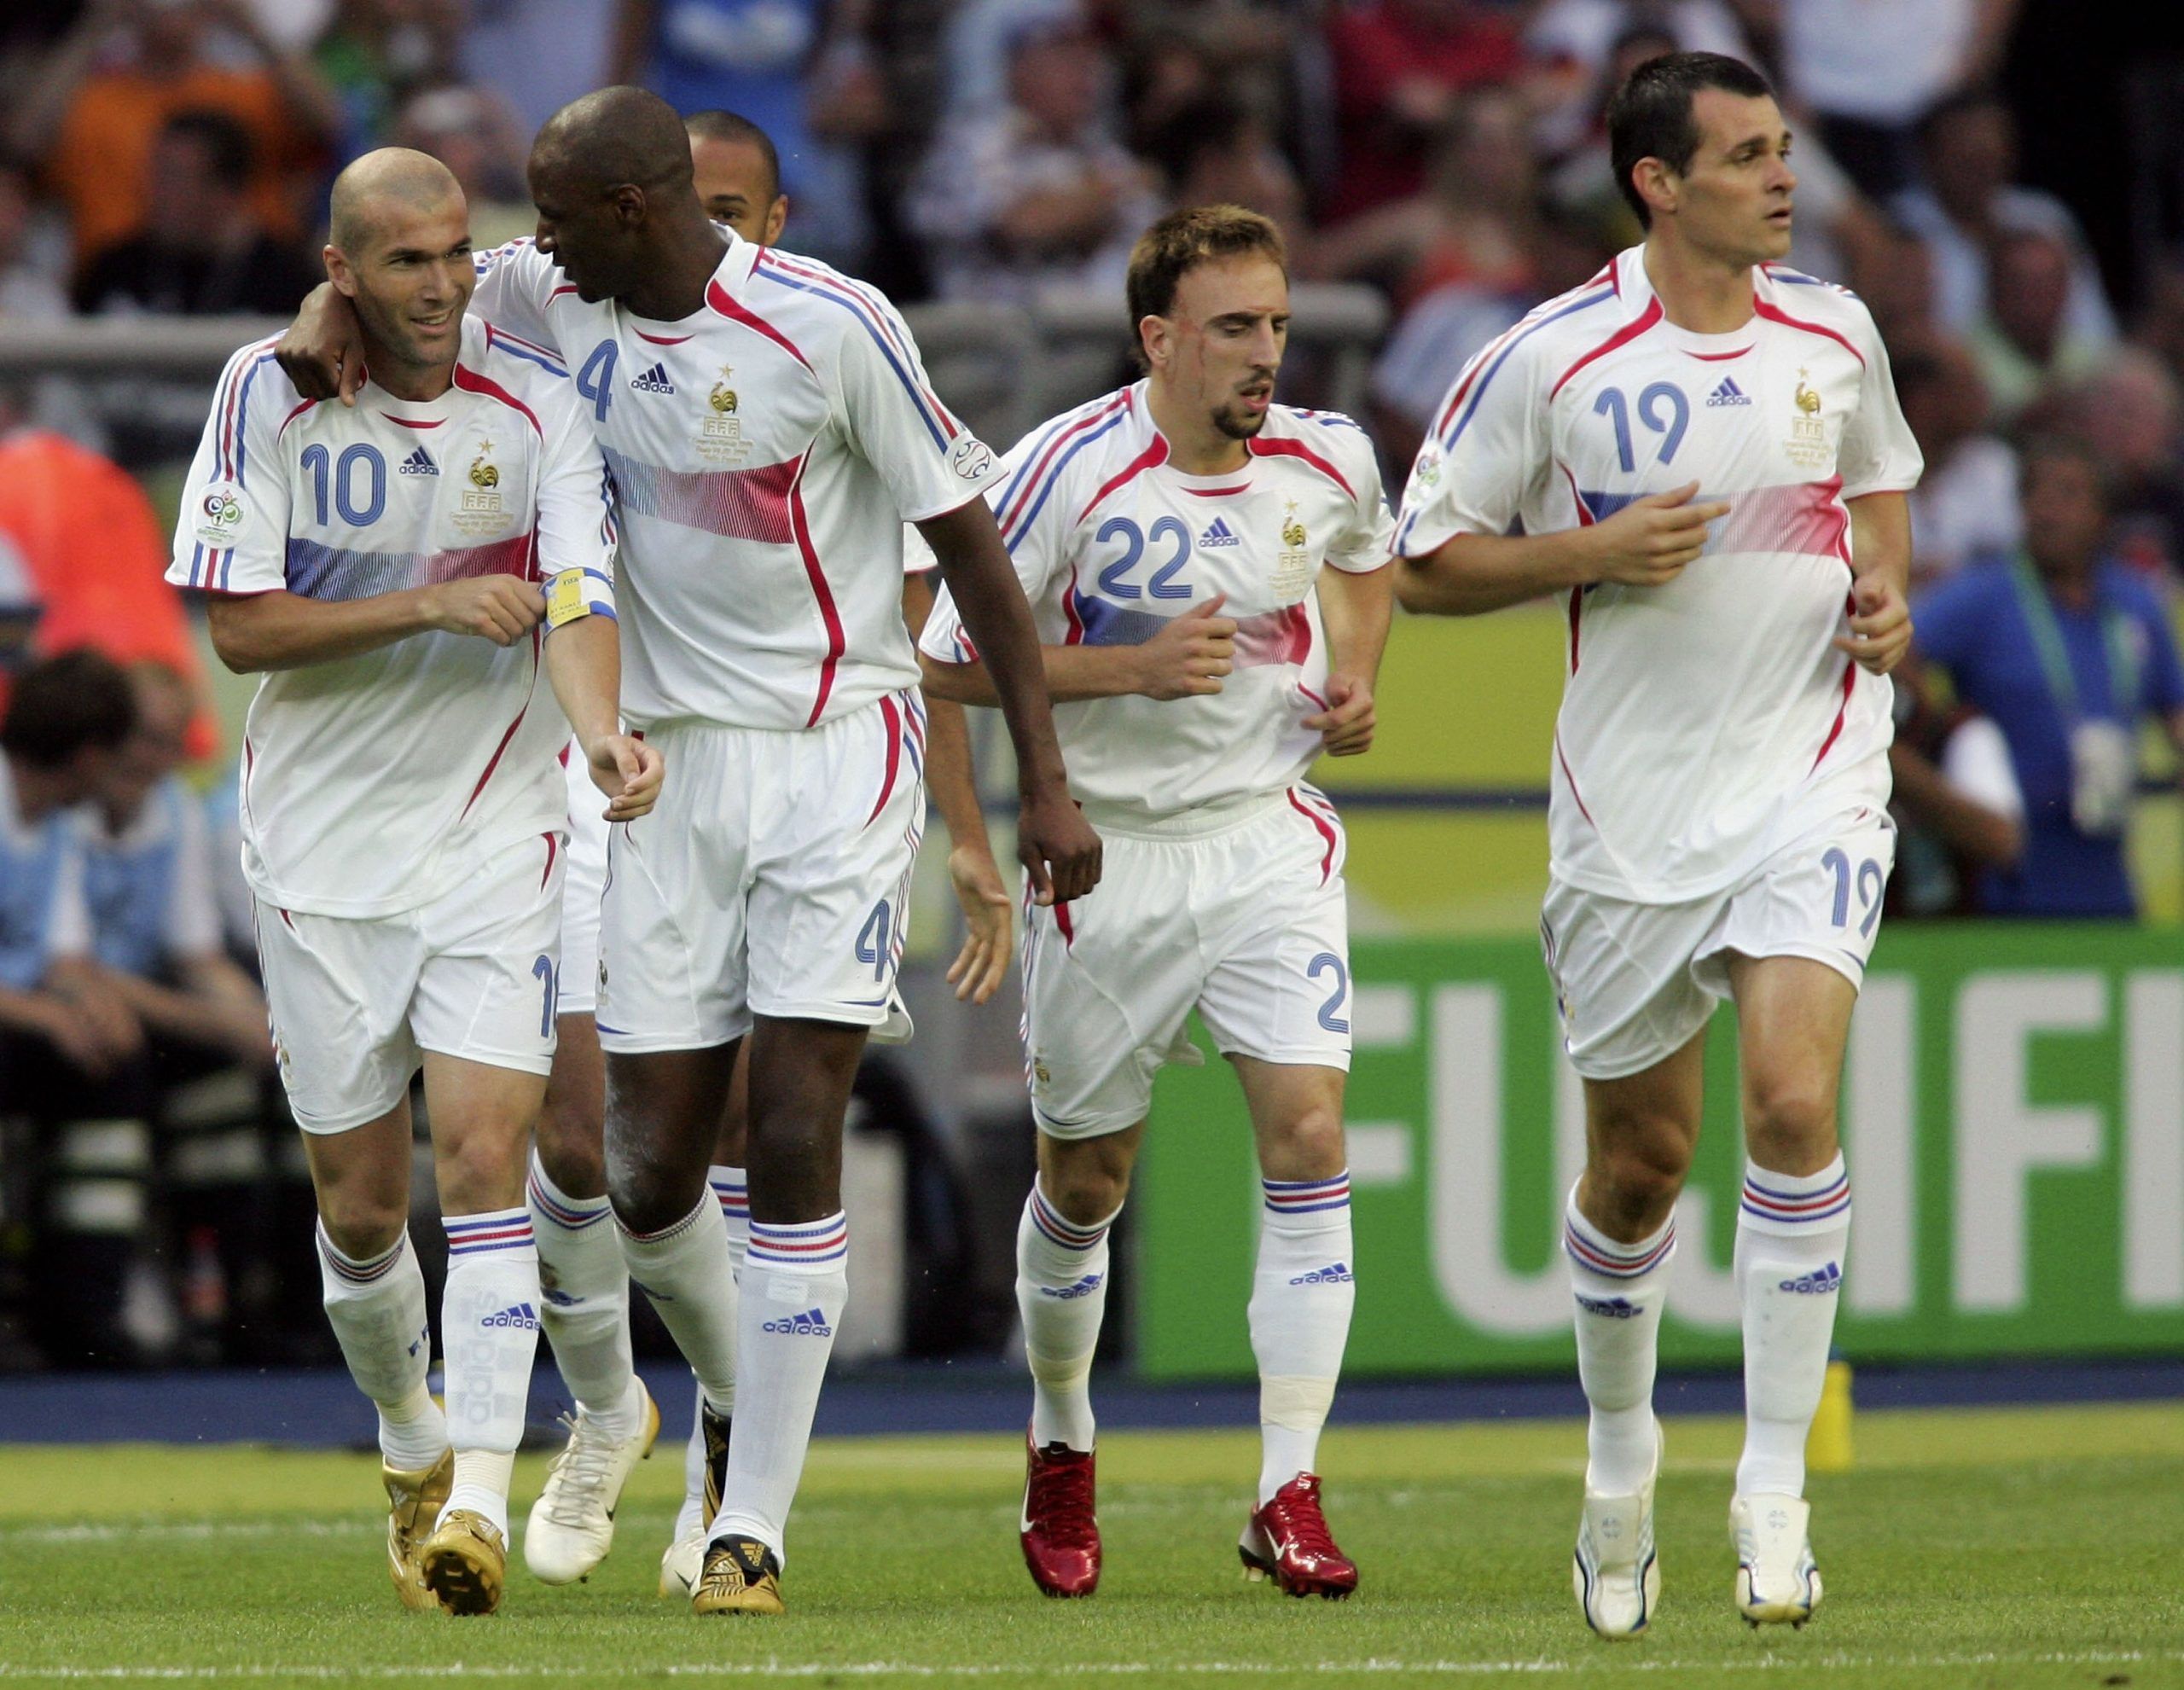 Thierry Henry, Zinedine Zidane in 2006 World Cup Team of the Tournament